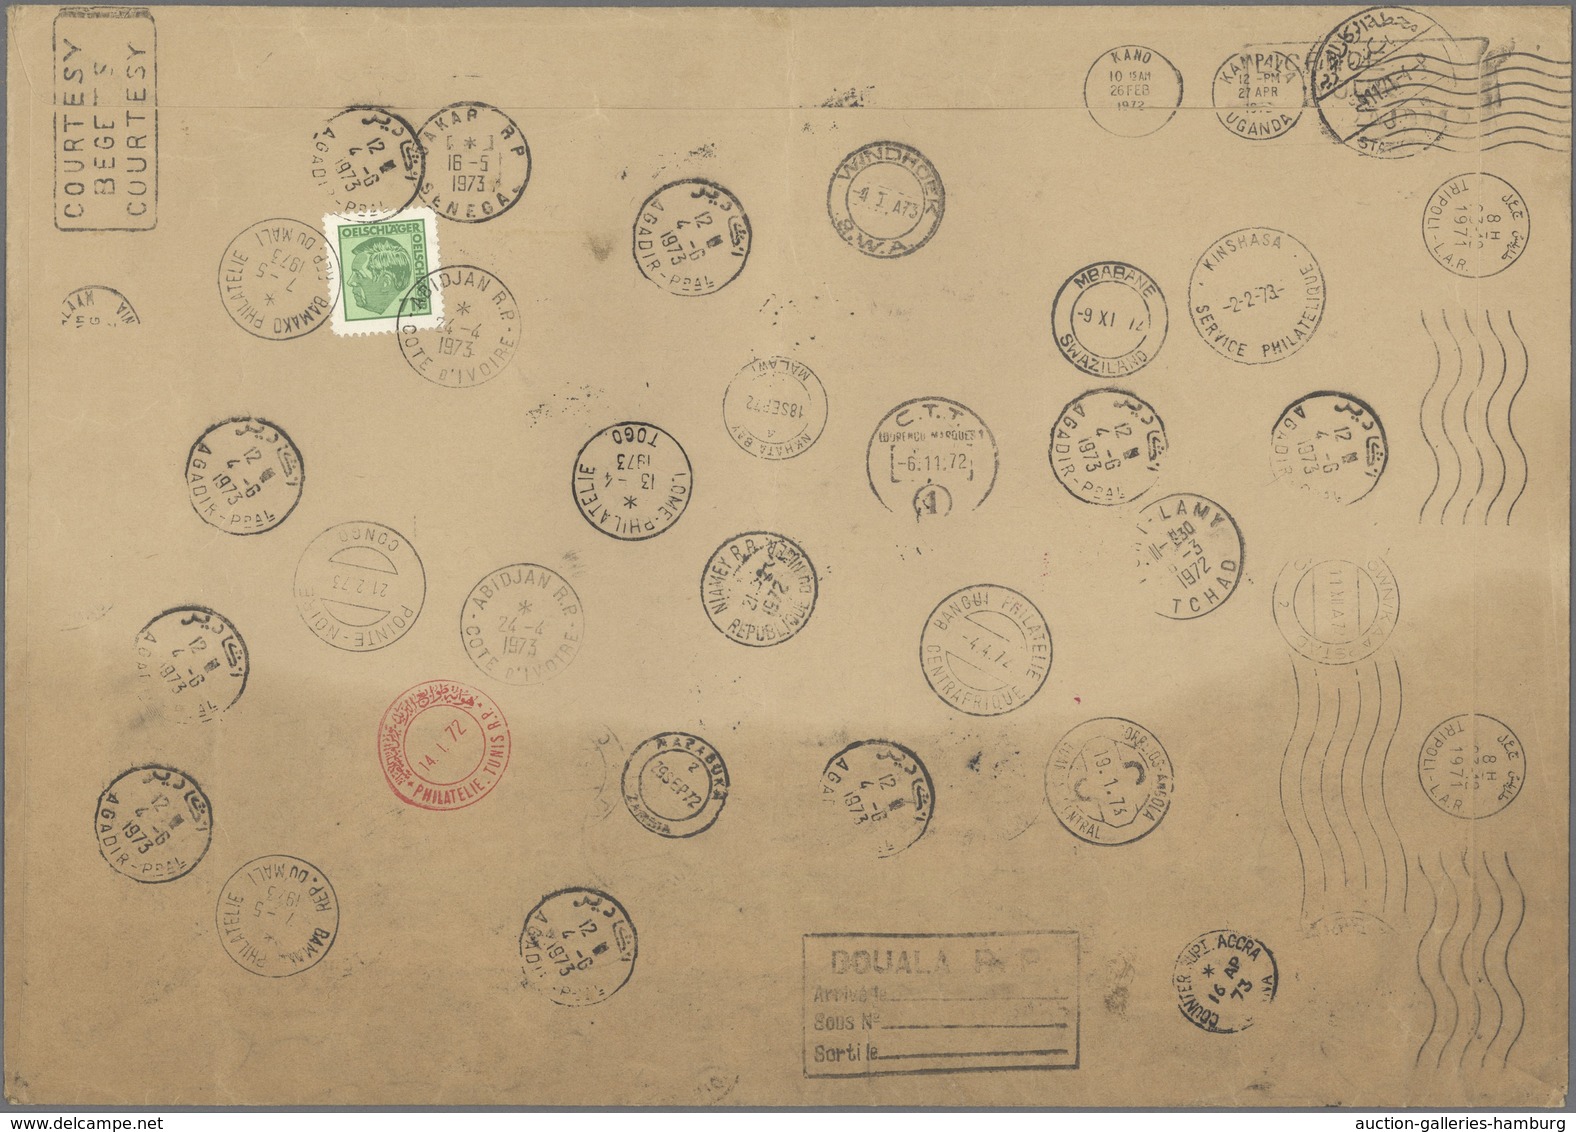 Ägypten: 1971/1973, Oelschläger "expedition" Cover, Large Sized Envelope Bearing Adhesives Of More T - 1866-1914 Khedivate Of Egypt